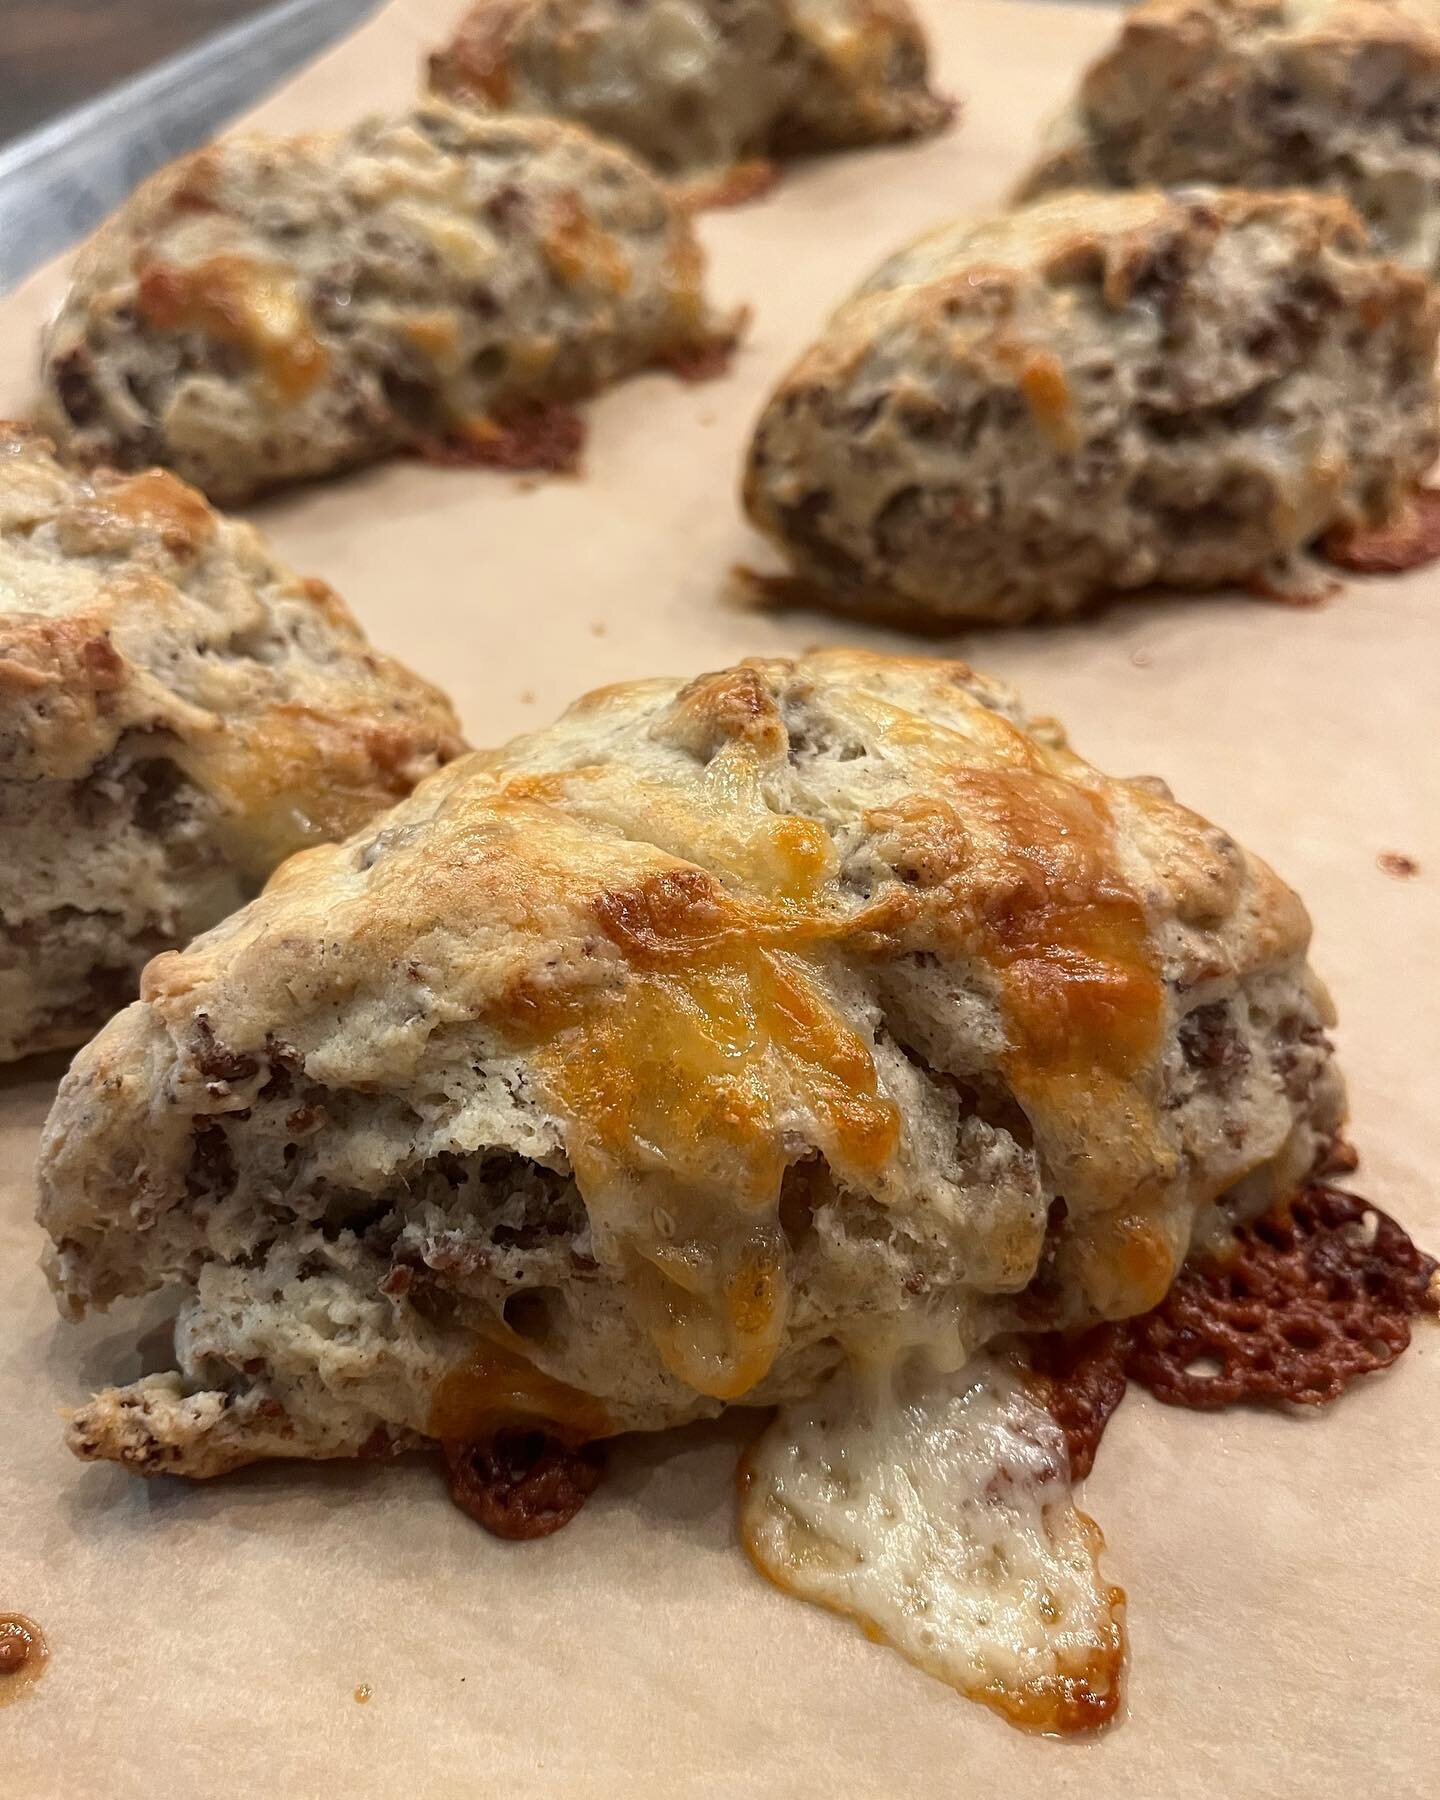 Our signature Sausage Sage &amp; Cheddar Scone reminds us of Sunday morning homemade biscuits and gravy. But this is the next level of breakfast perfection. 

Scones and Gravy 🫶

Try our (made from scratch) Sausage Sage &amp; Cheddar Scone smothered